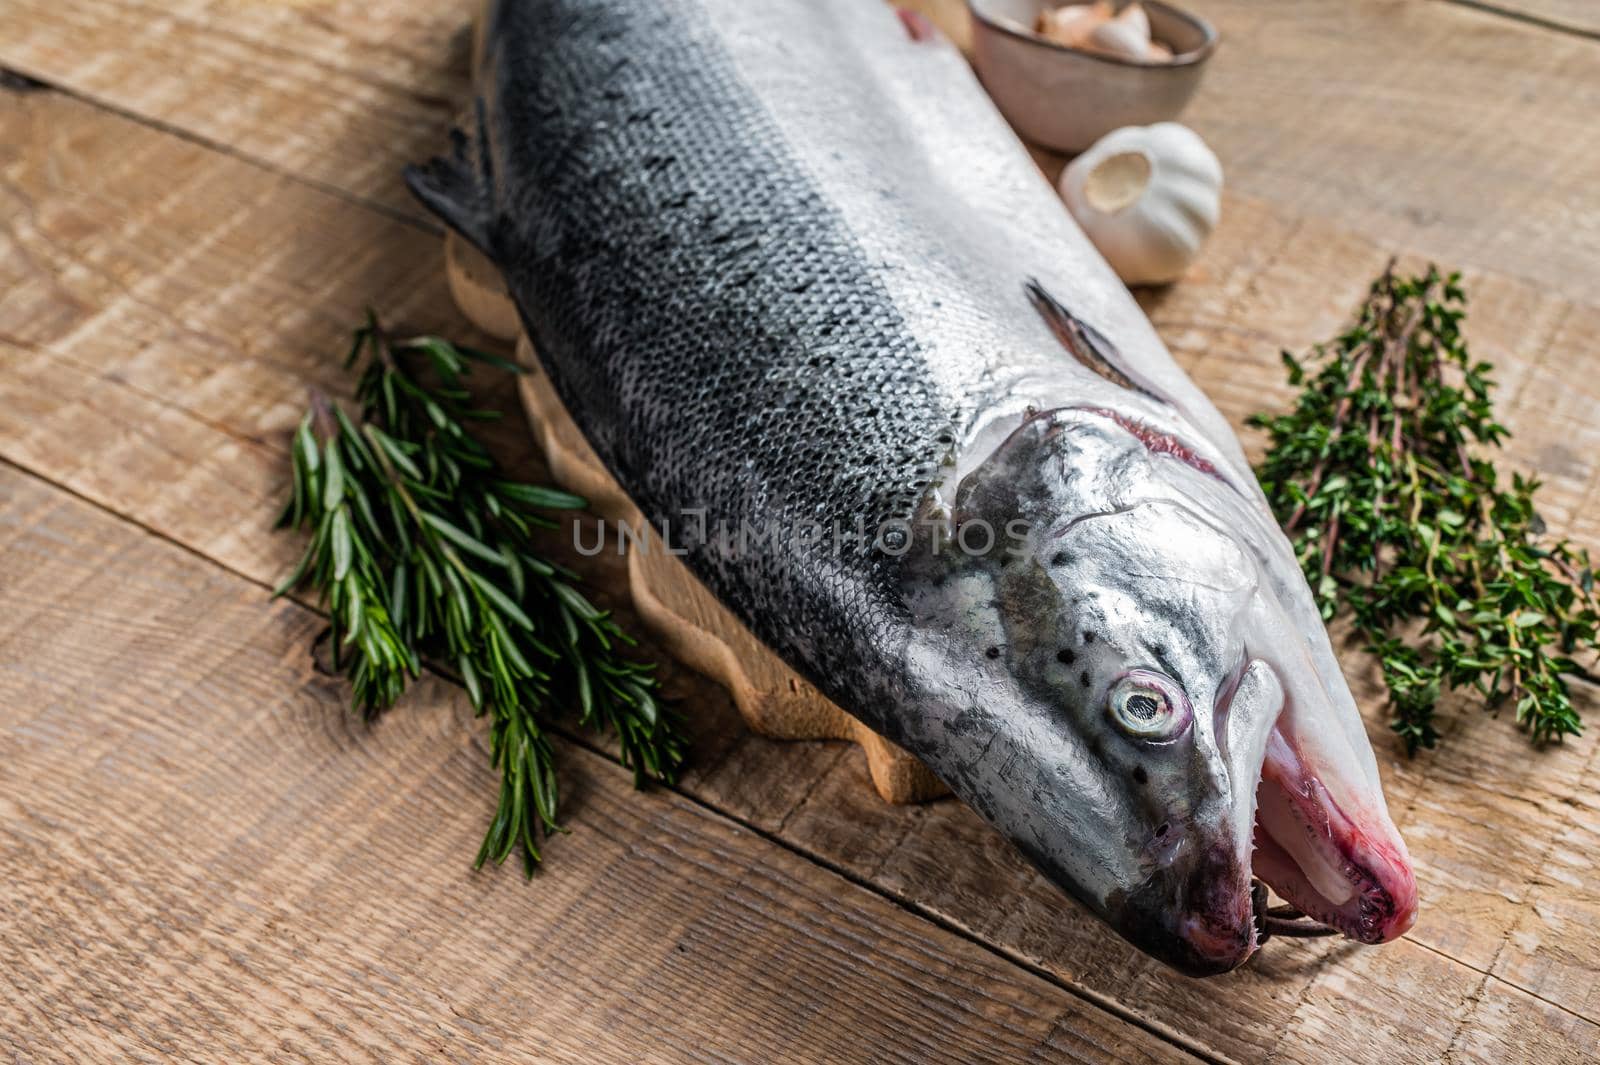 Raw marine salmon fish on a wooden kichen table with herbs. Wooden background. Top view.